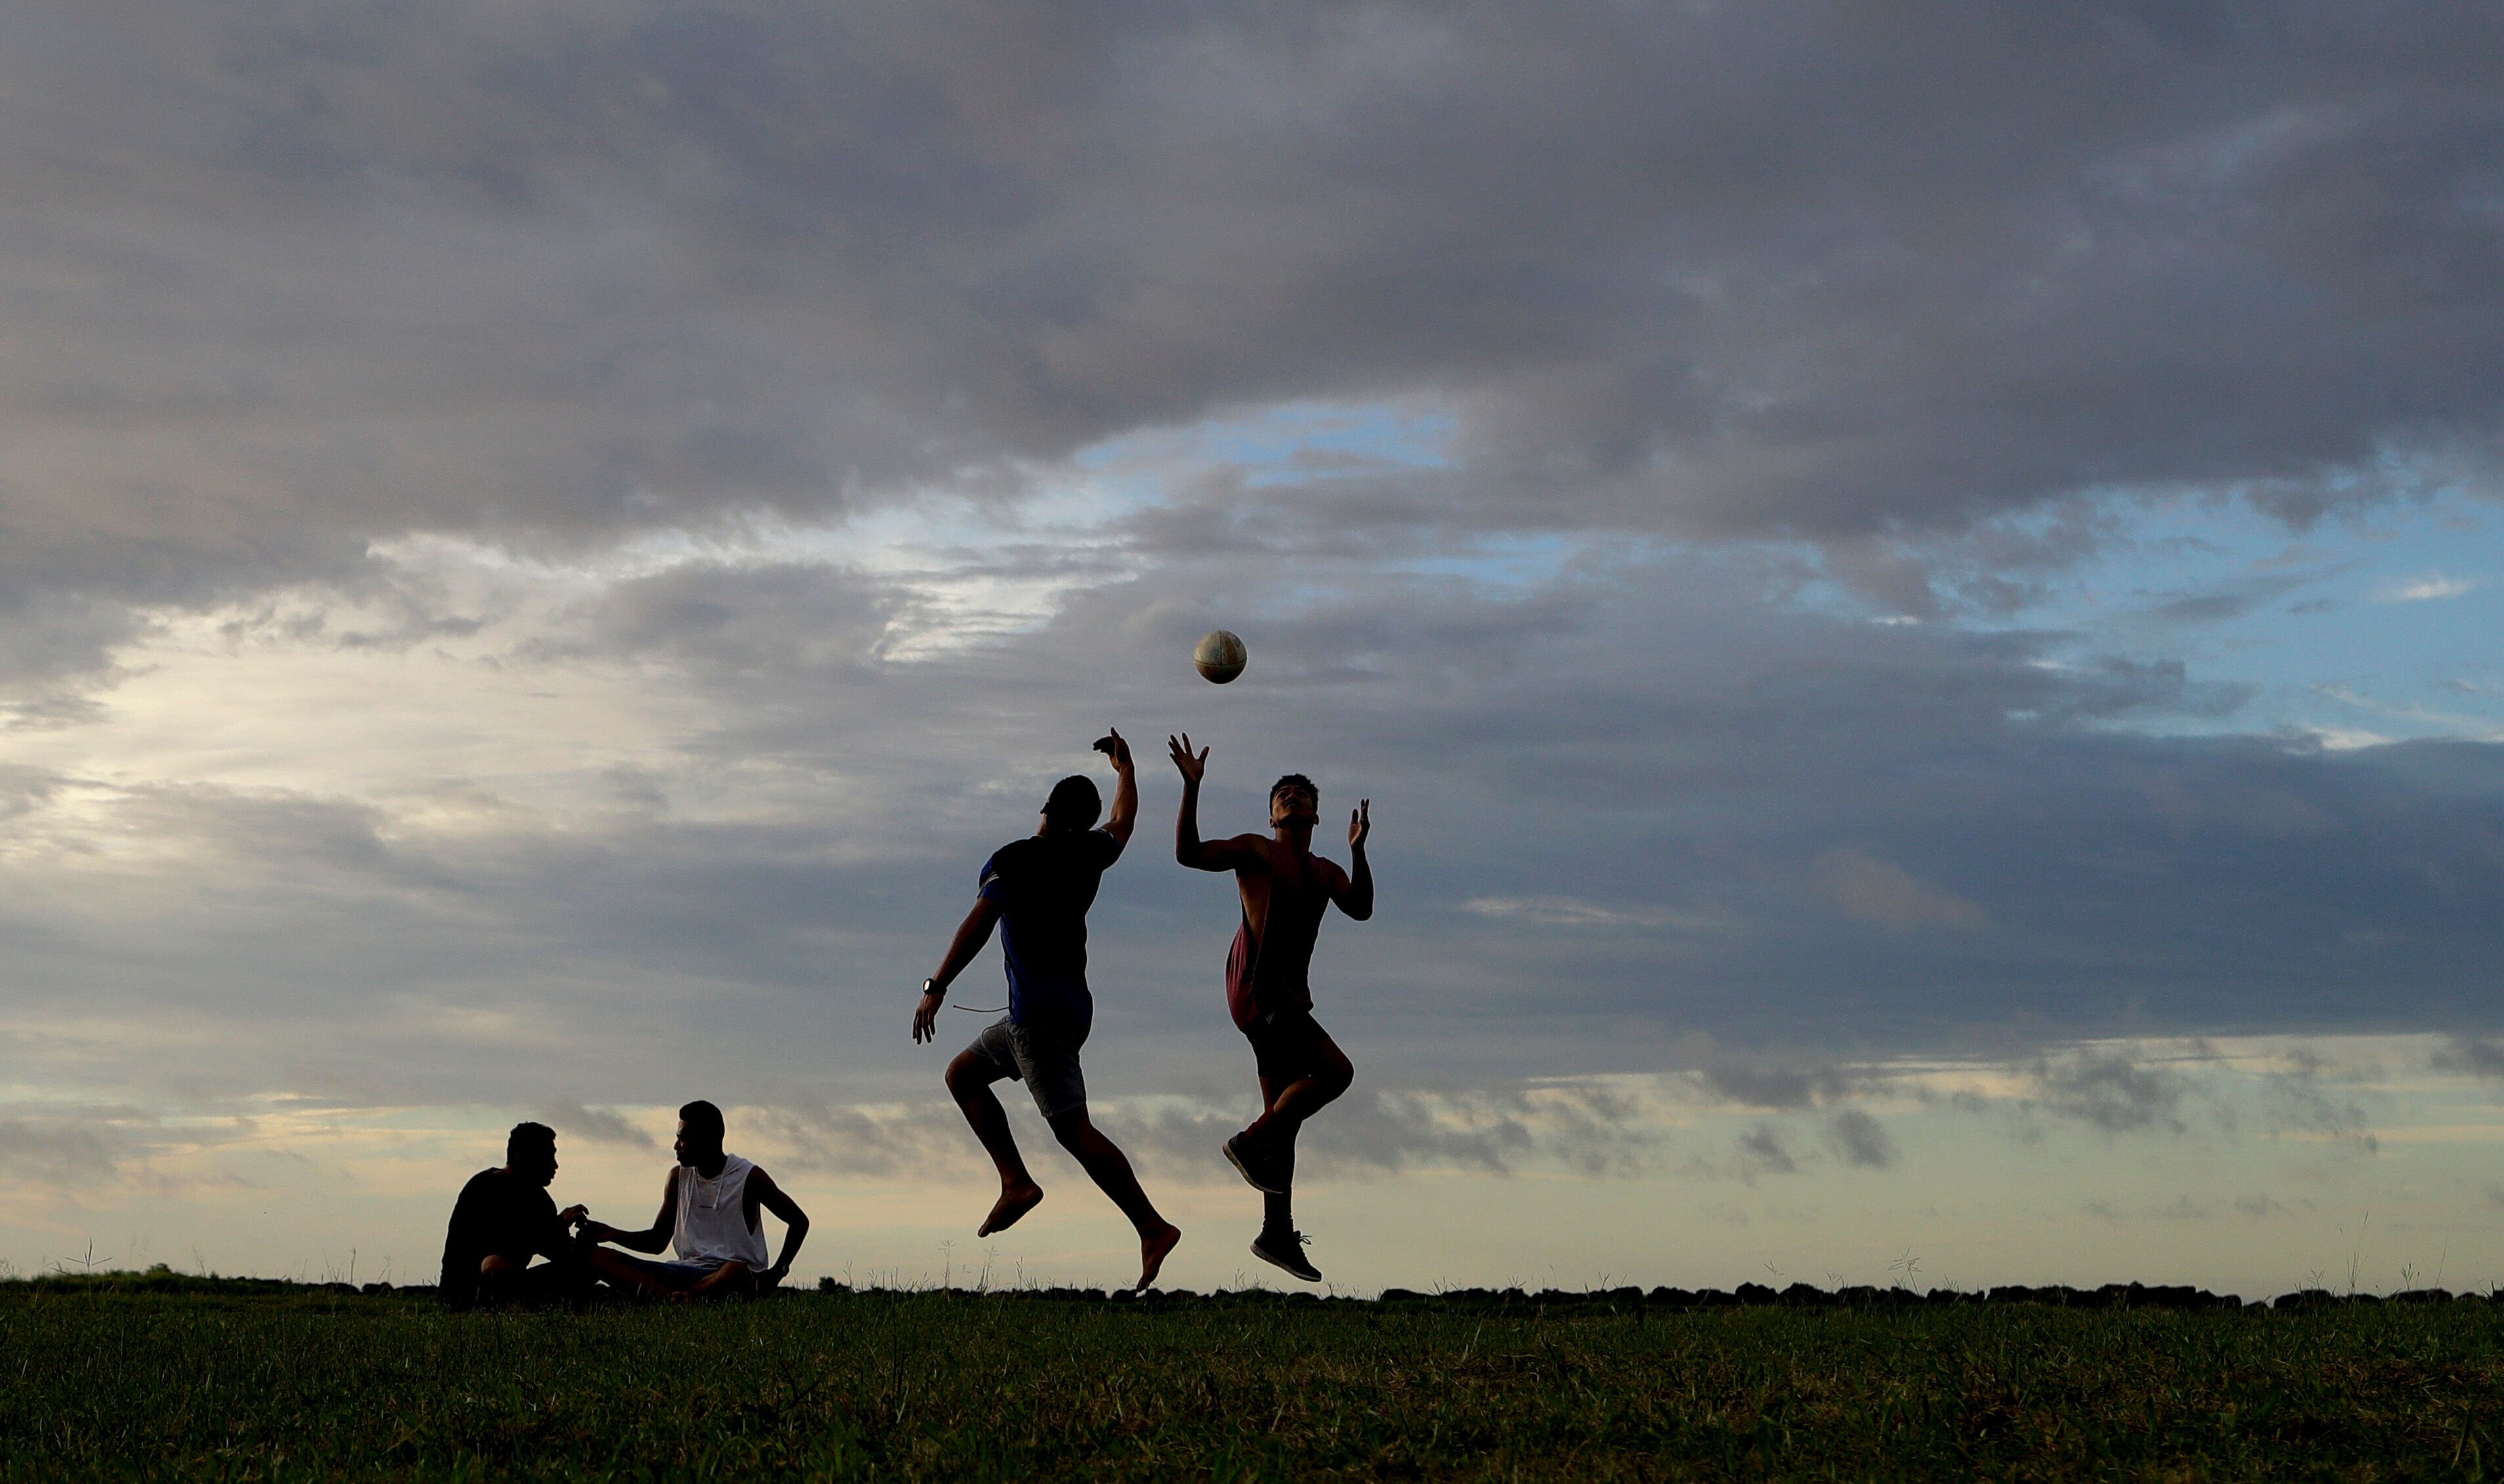 Young men play a game of rugby at sunset in Nuku'alofa, Tonga, on Wednesday, April 10, 2019 in this file photo. (AP Photo/Mark Baker, File)